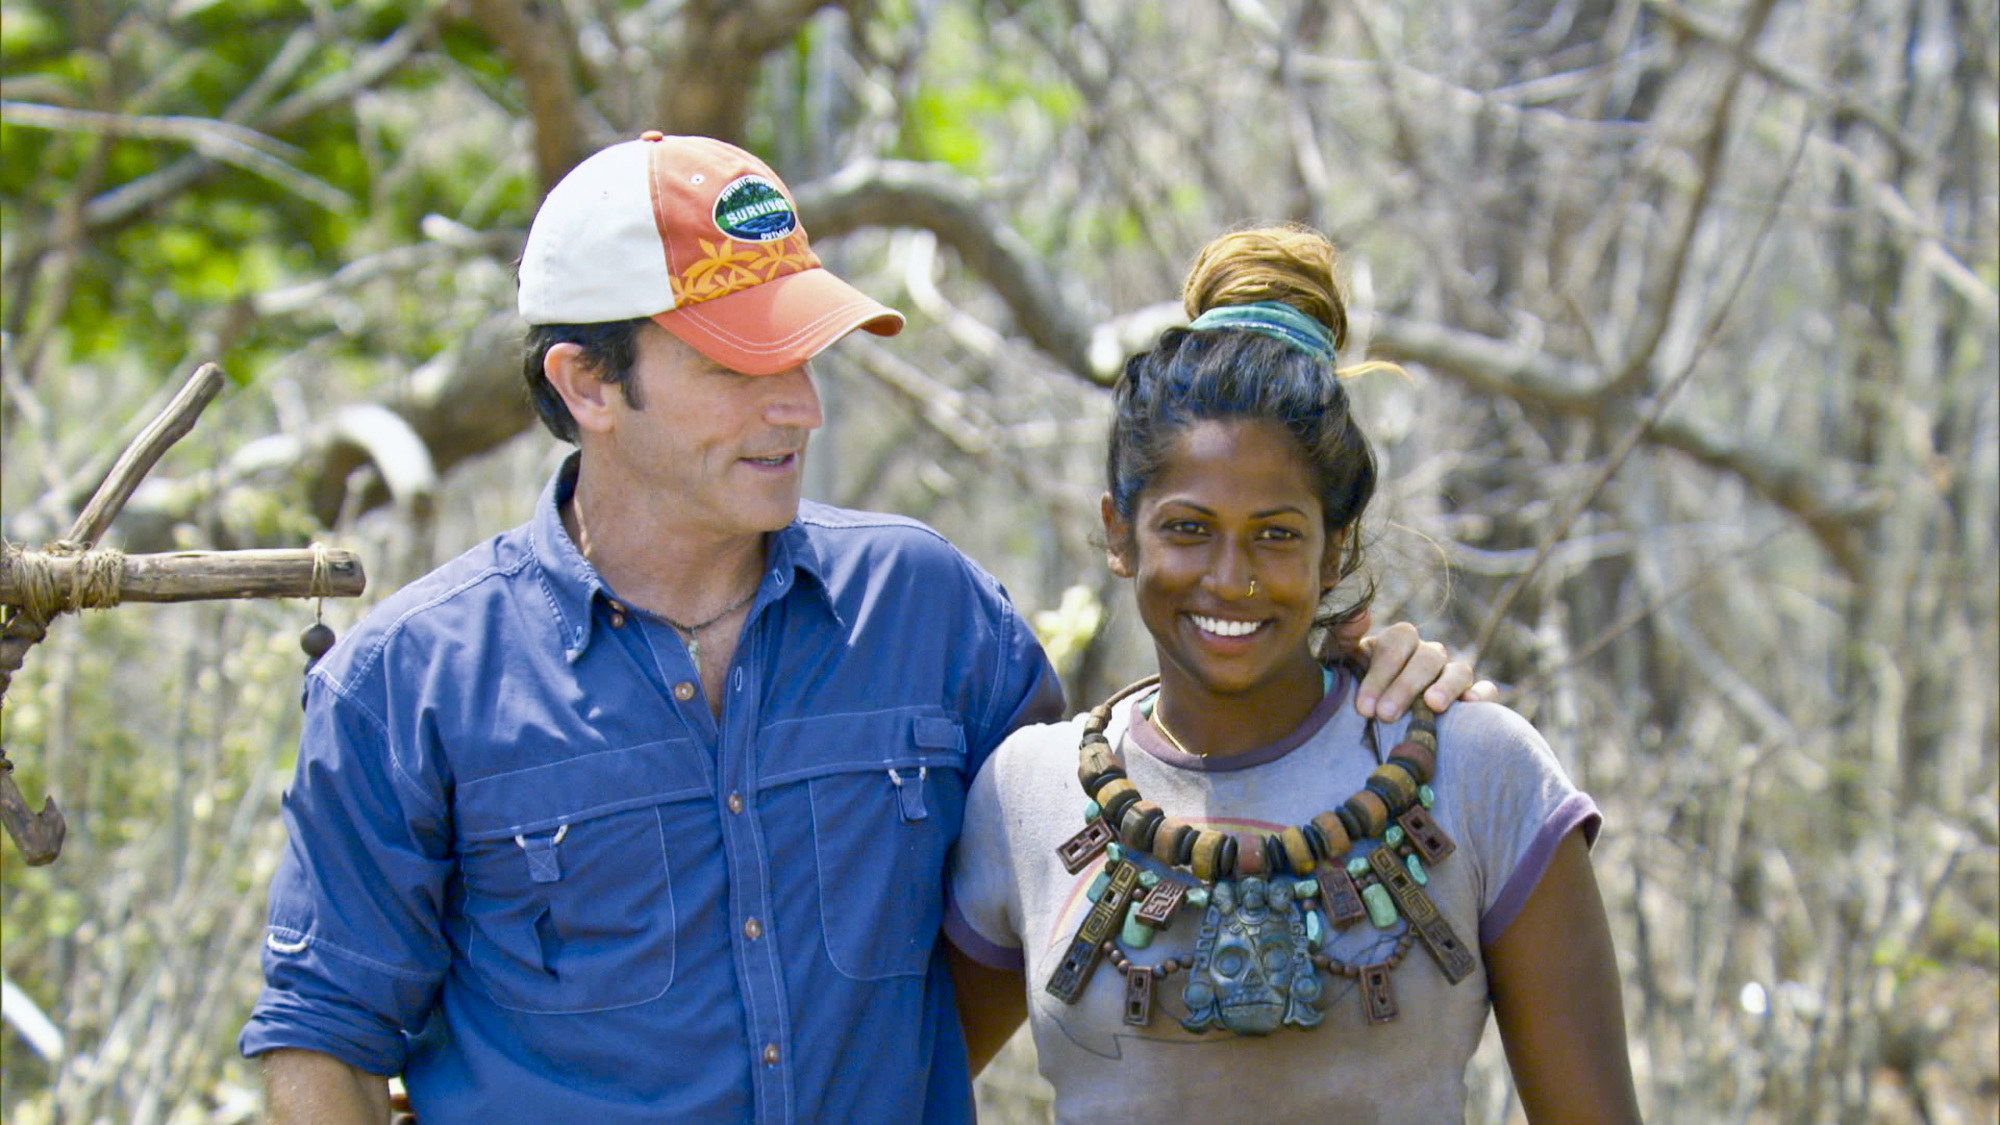 Jeff Probst gives Natalie Anderson the immunity necklace